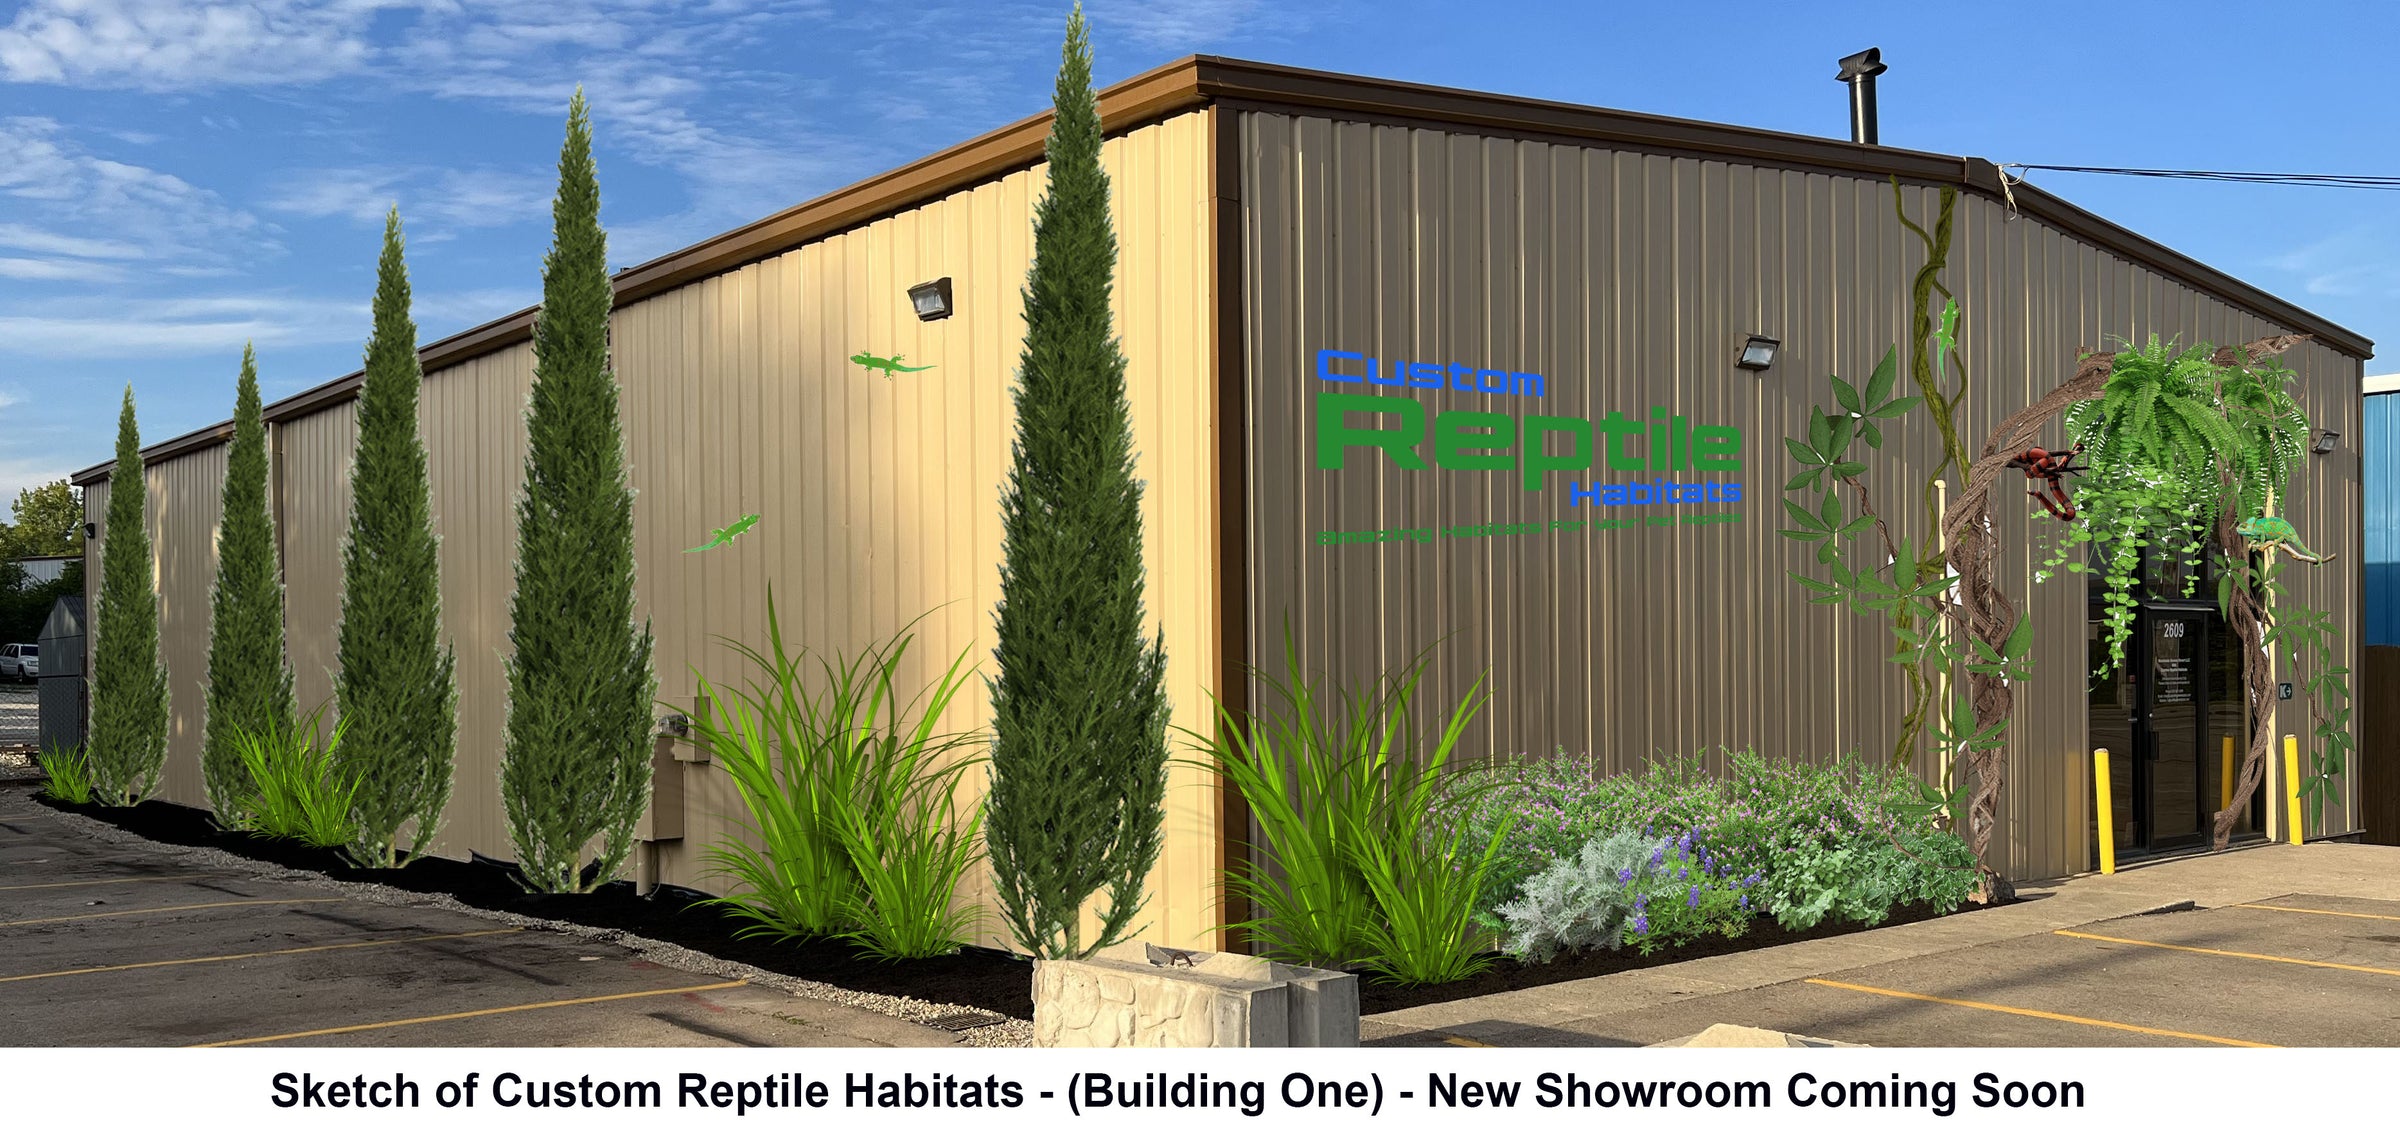 Custom Reptile Habitats Dayton based Showroom is being renovated and will be open soon.  